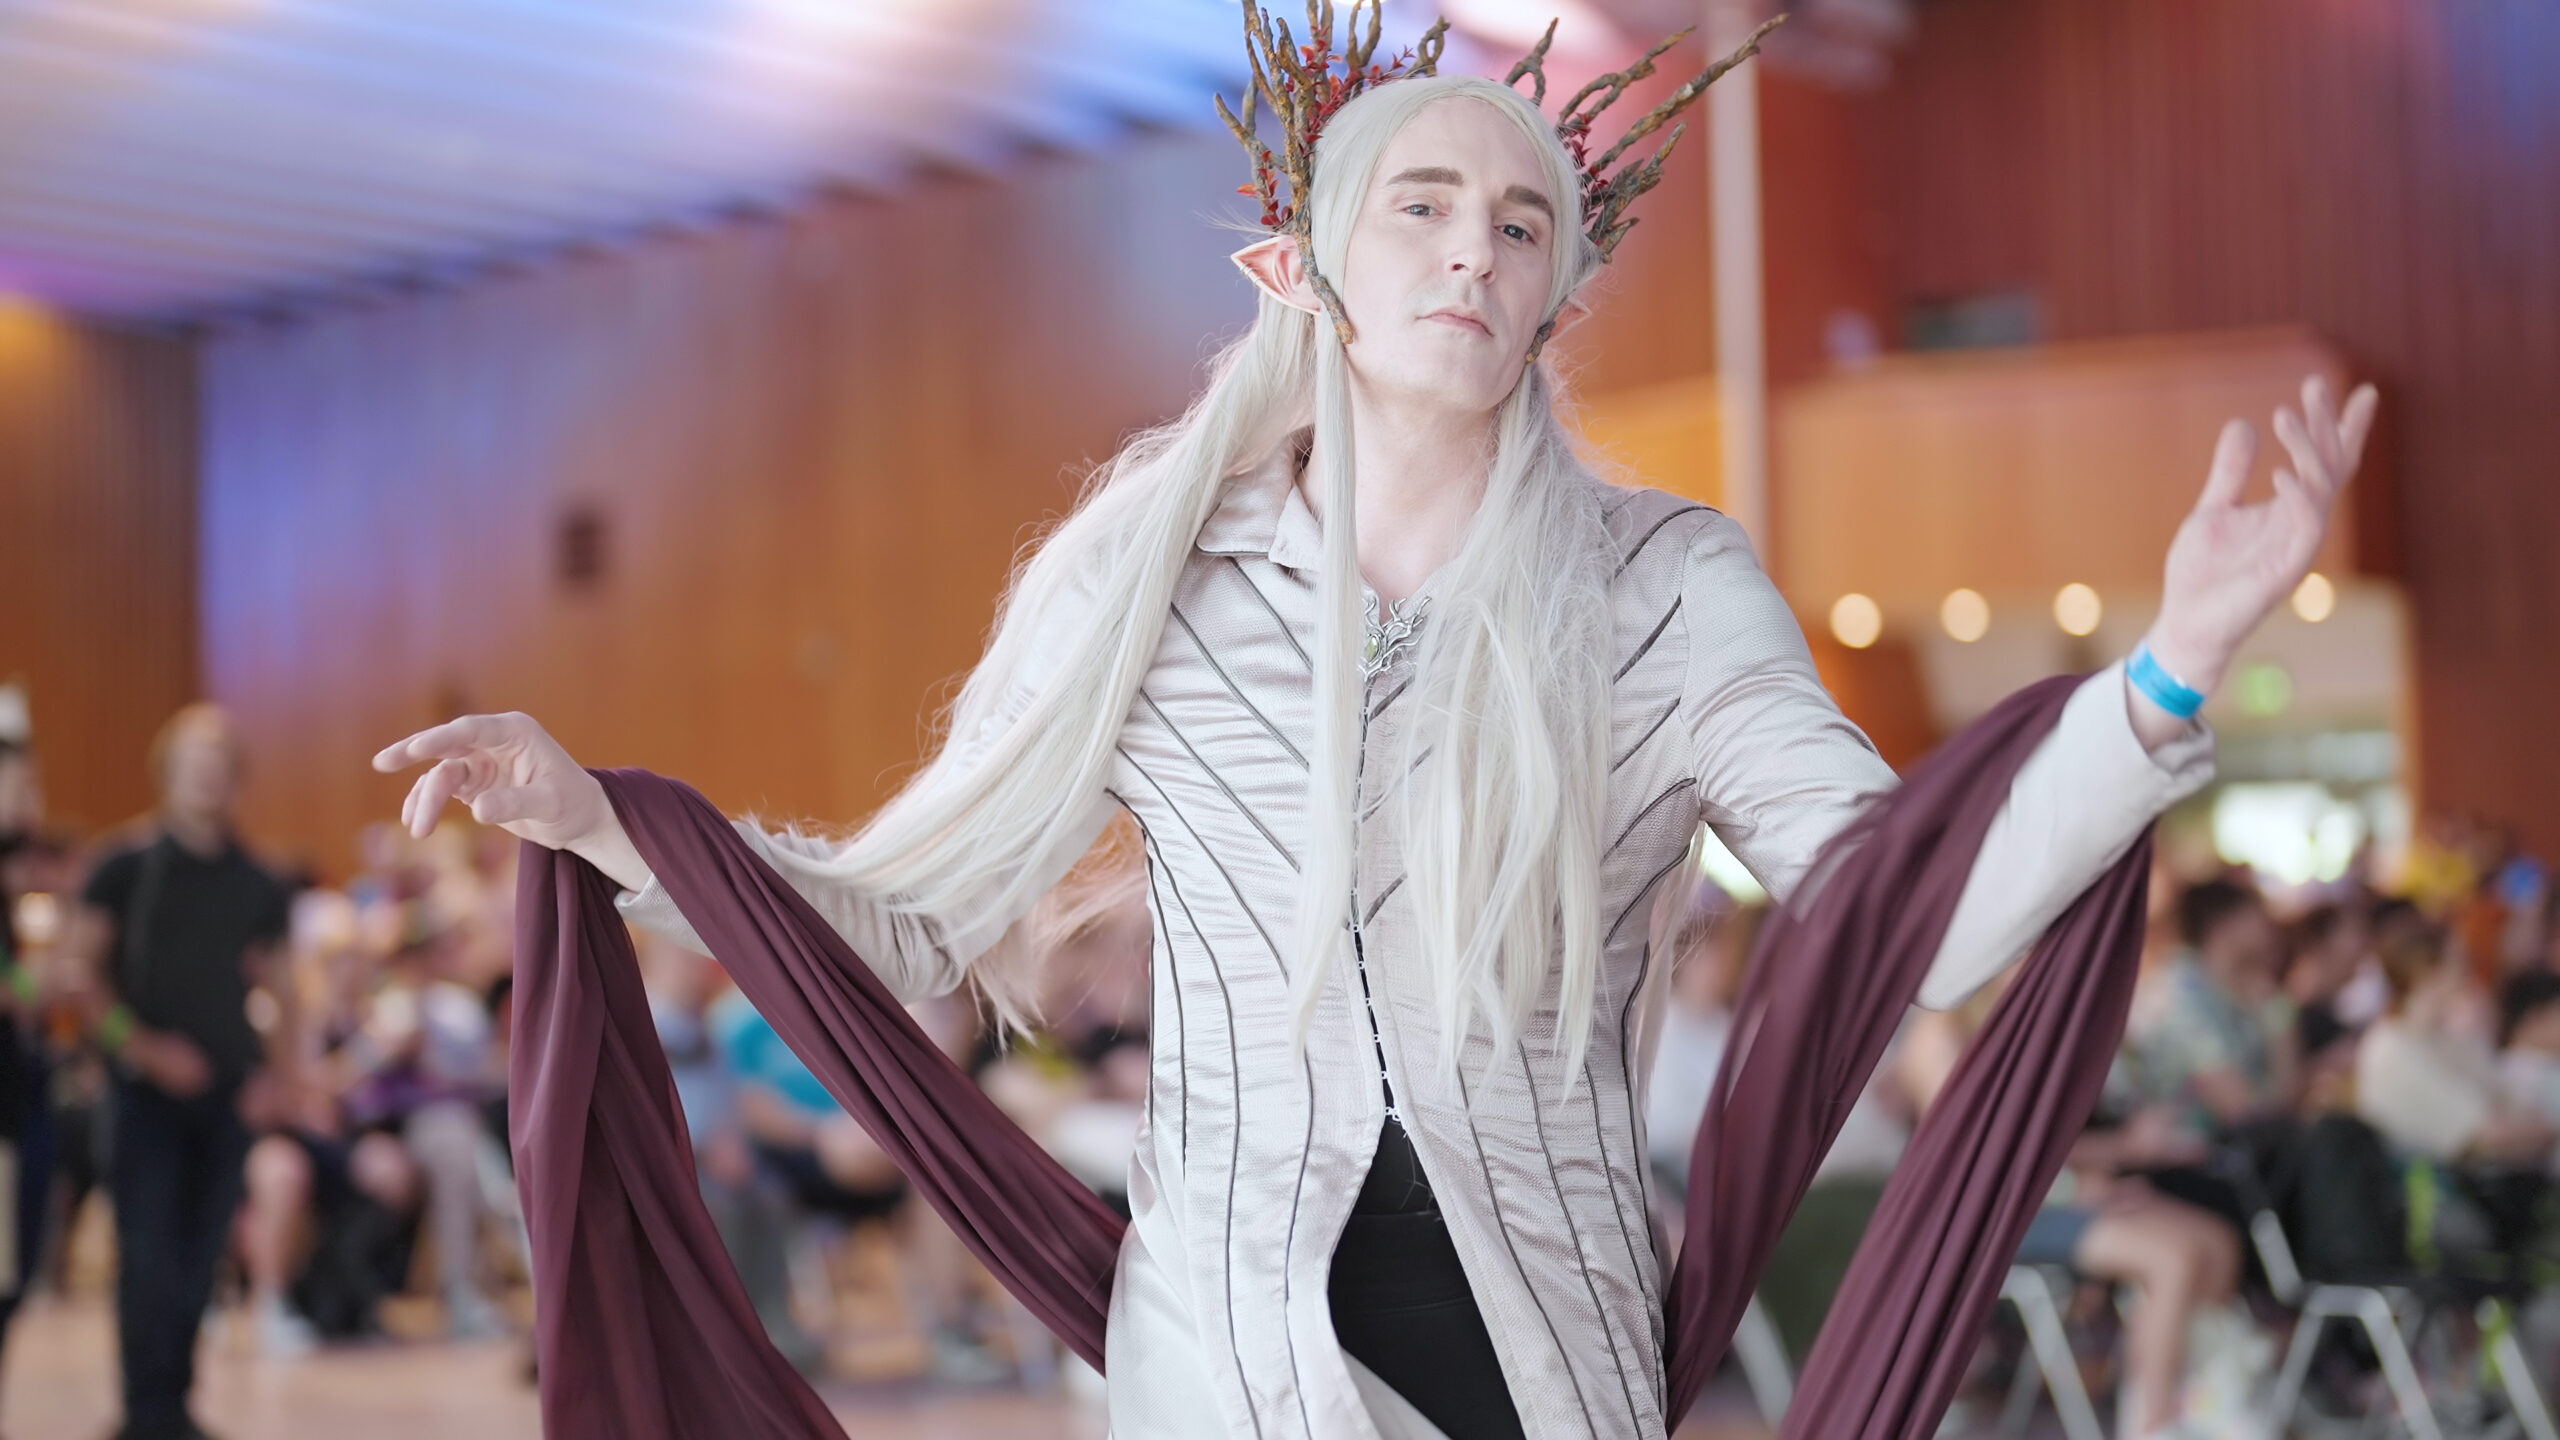 Fan wearing Thranduil Elven king  costume from LOTR posing for camera at a cosplay event